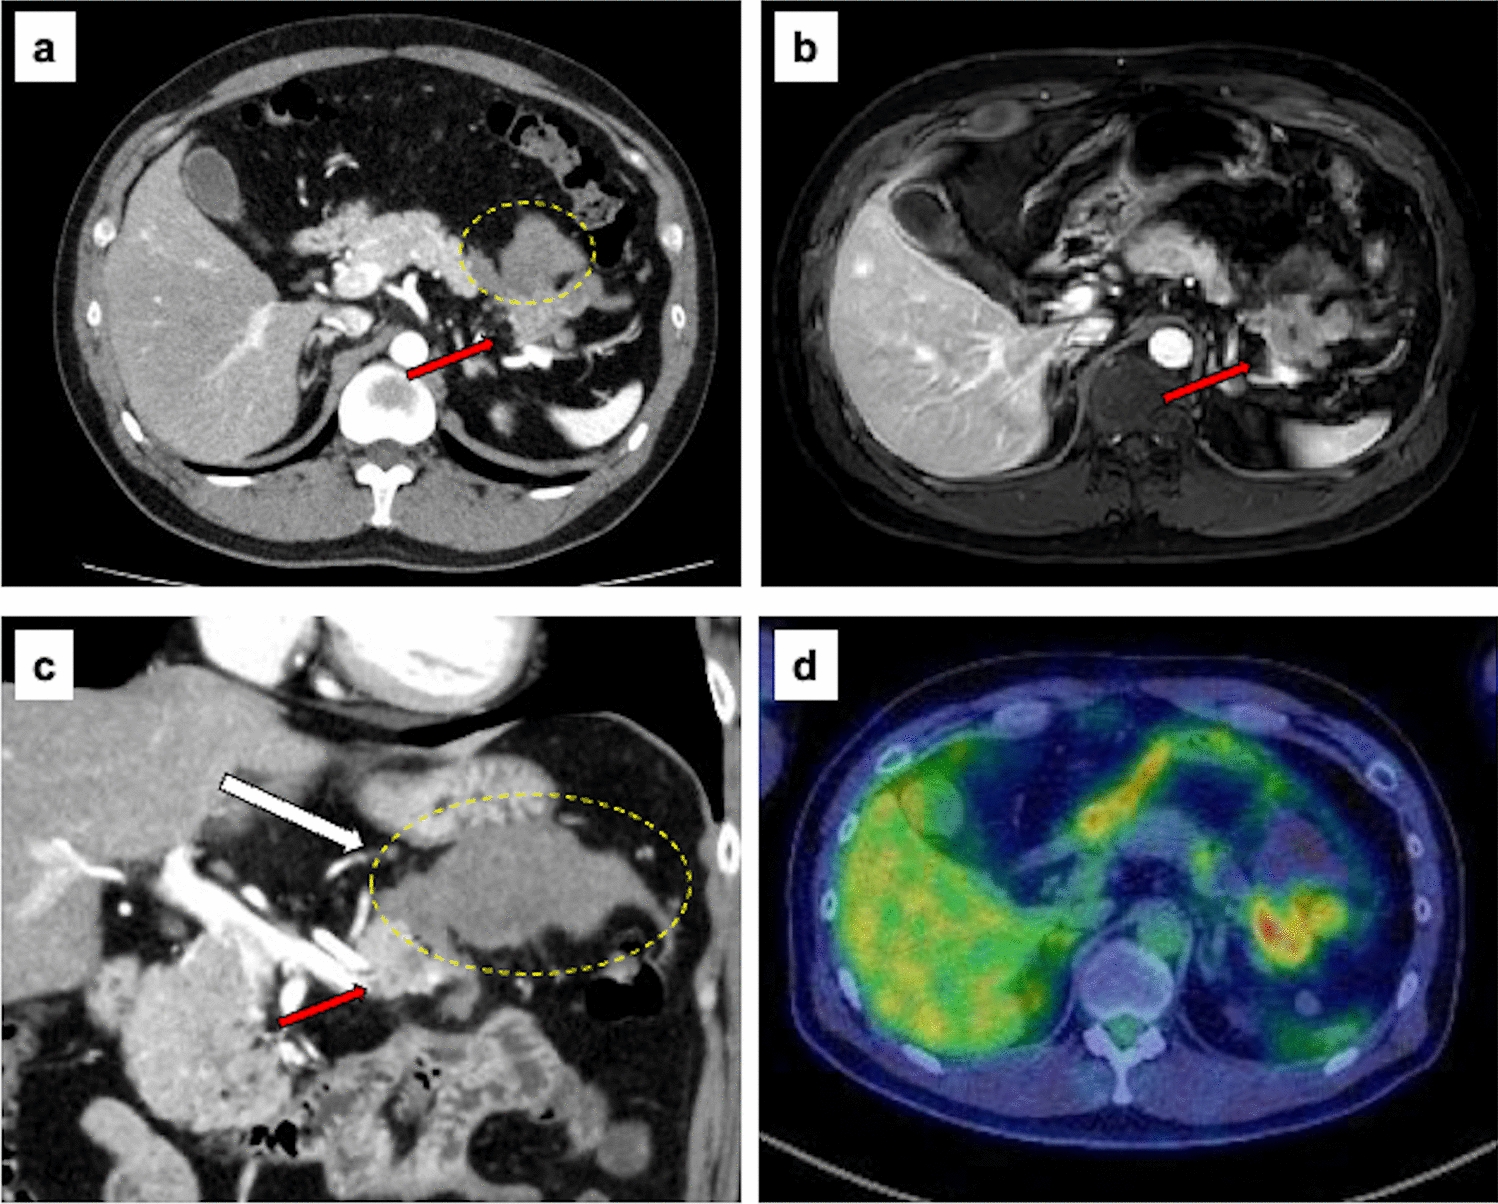 Successful curative treatment for a ruptured pancreatic acinar cell carcinoma by radical resection following modified FOLFIRINOX: a case report and literature review